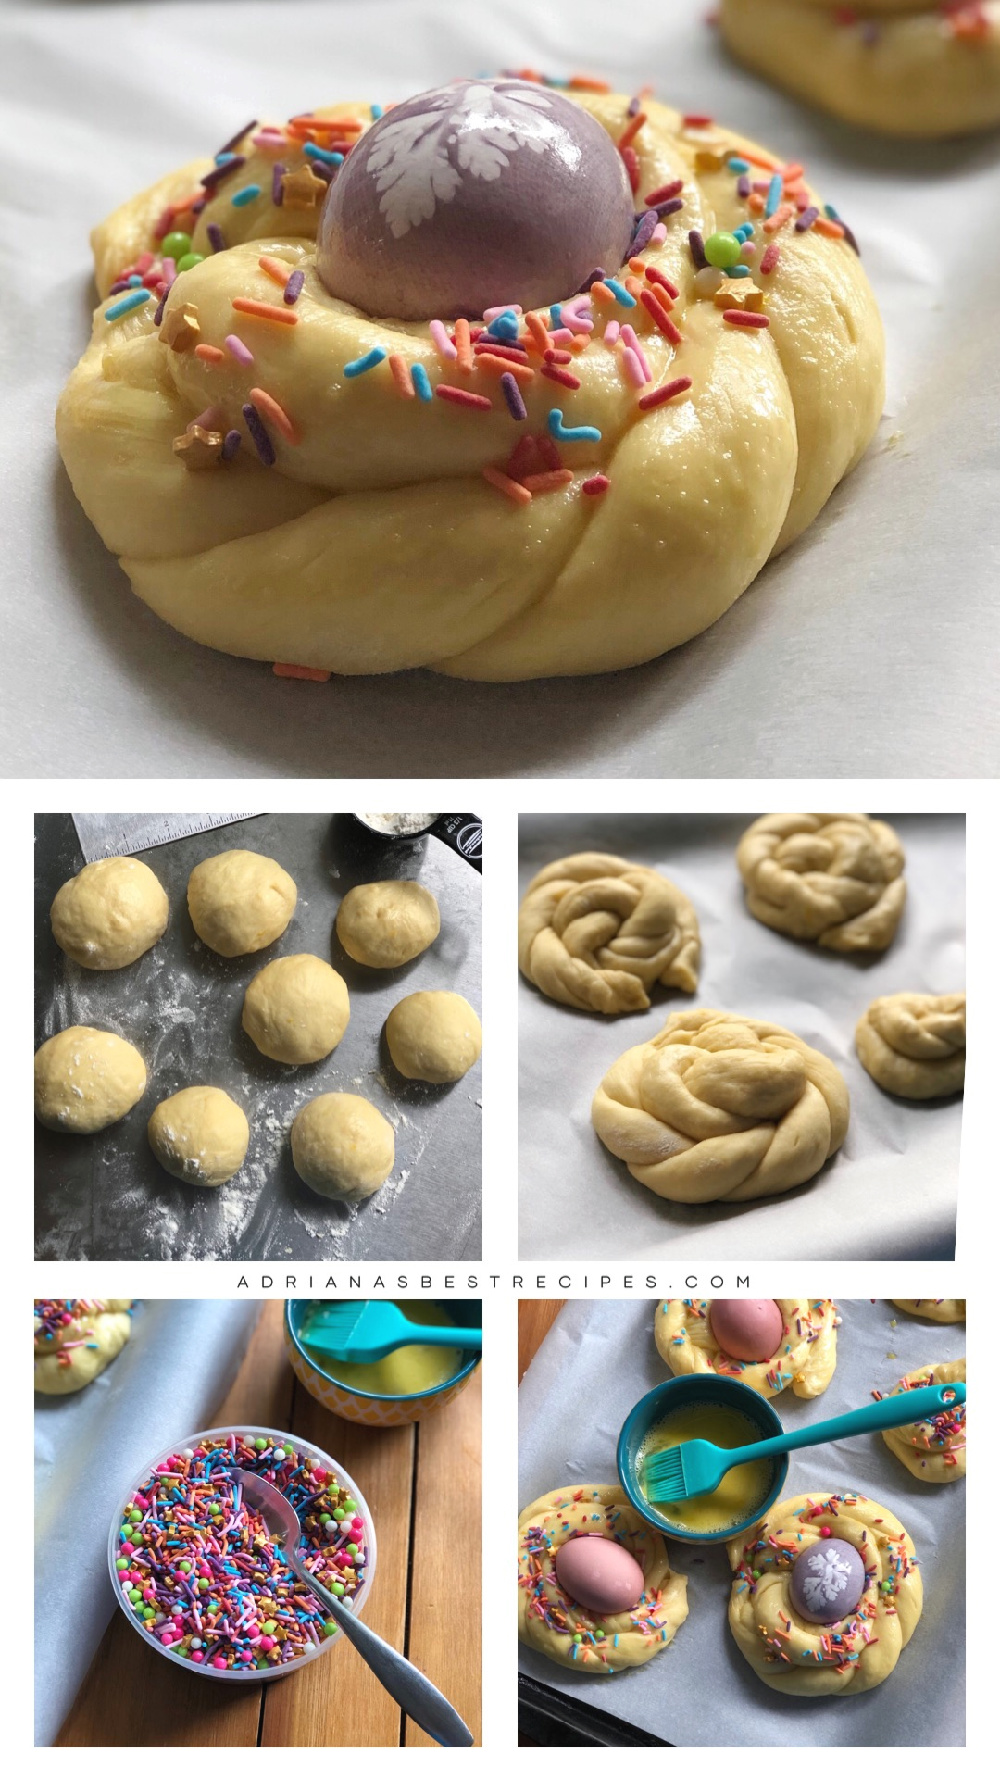 Showing the process on how to braid bread